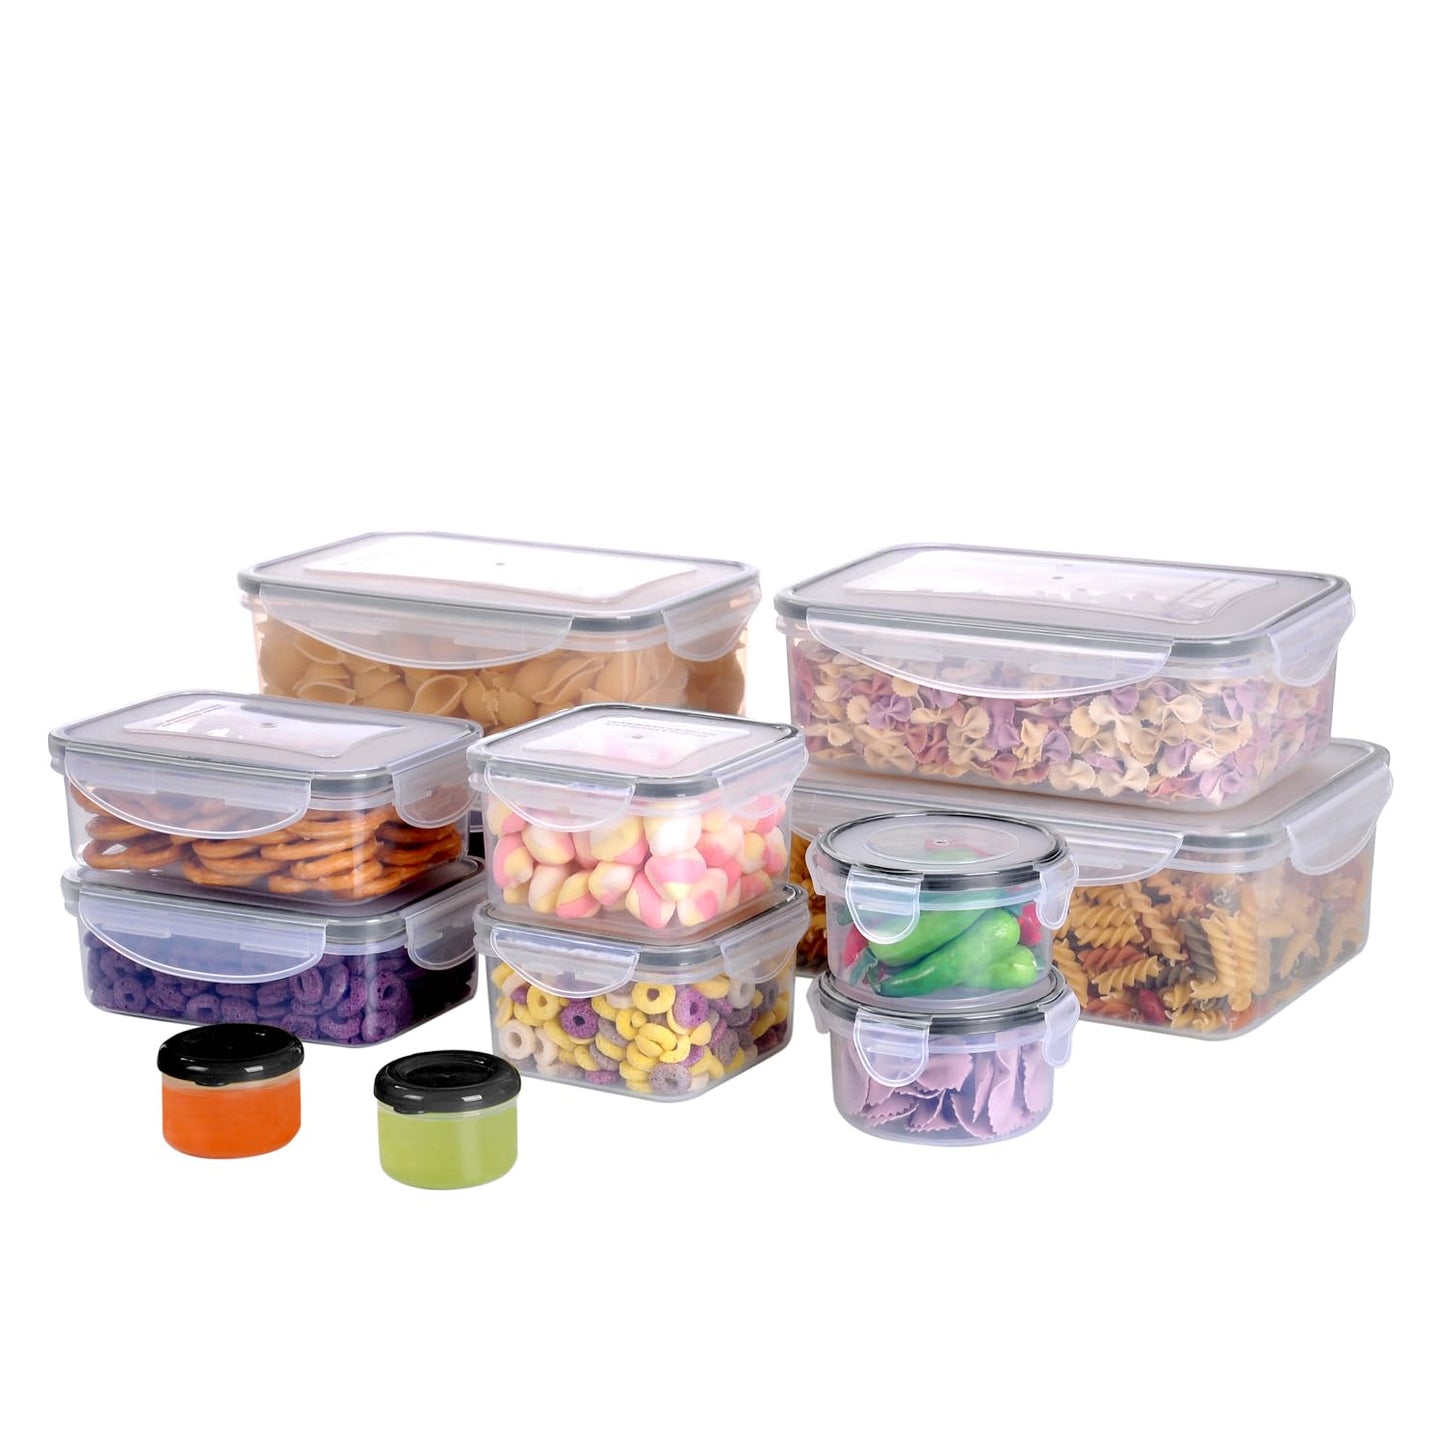 MTR 44PC Value Pack Storage Containers BPA Free Kitchen Storage Dishwasher Safe Microwave Safe Freezer Safe Airtight Silicone Containers Leakproof & Reusable (44)